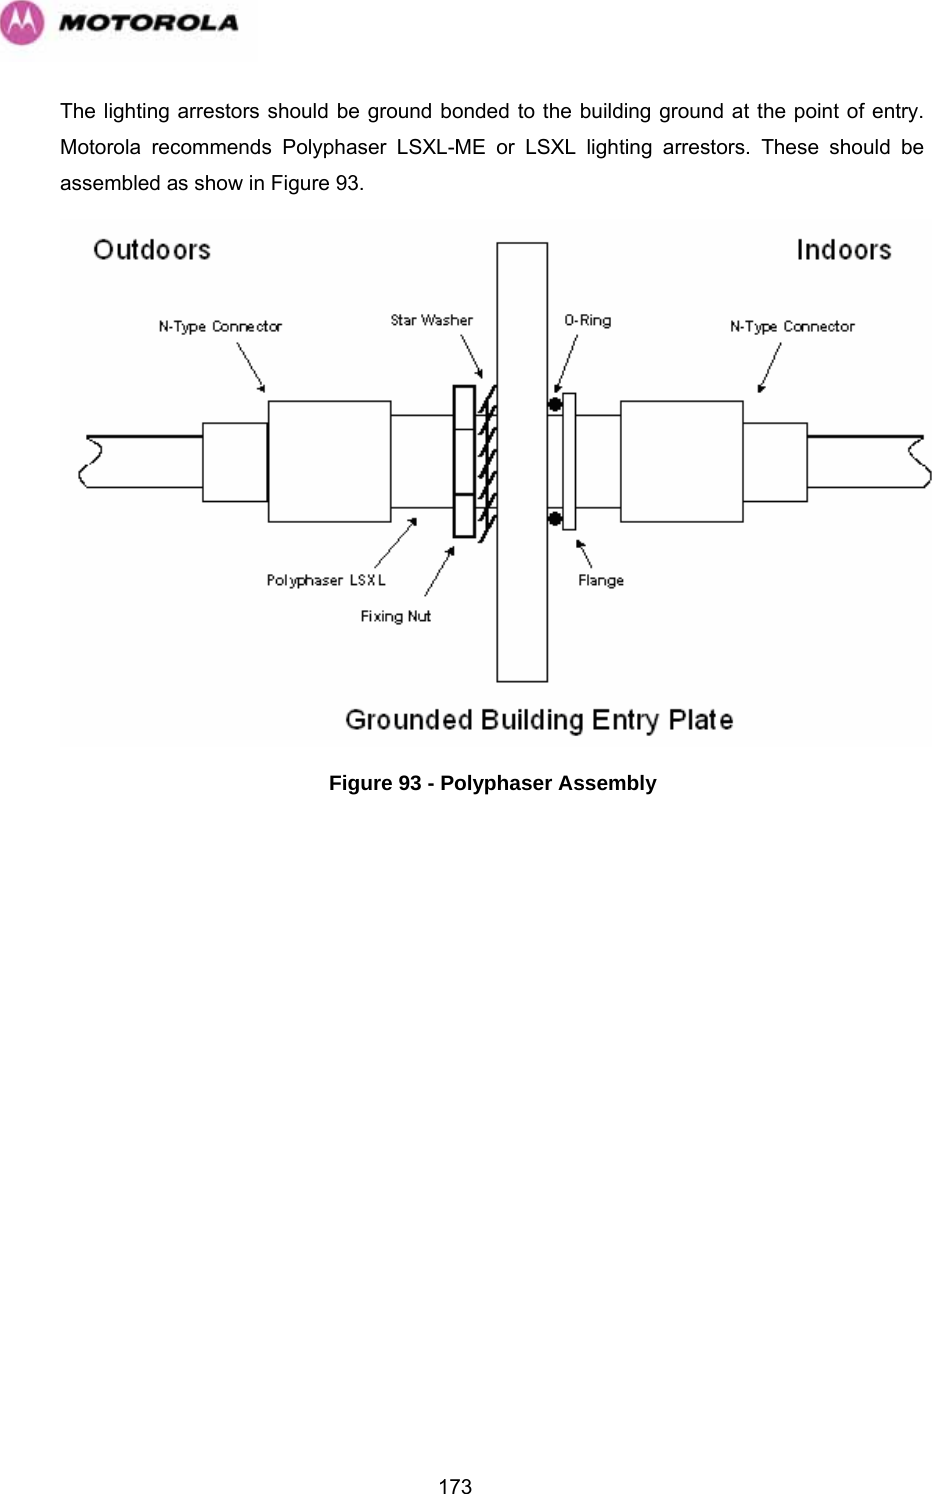   173The lighting arrestors should be ground bonded to the building ground at the point of entry. Motorola recommends Polyphaser LSXL-ME or LSXL lighting arrestors. These should be assembled as show in Figure 93.  Figure 93 - Polyphaser Assembly   